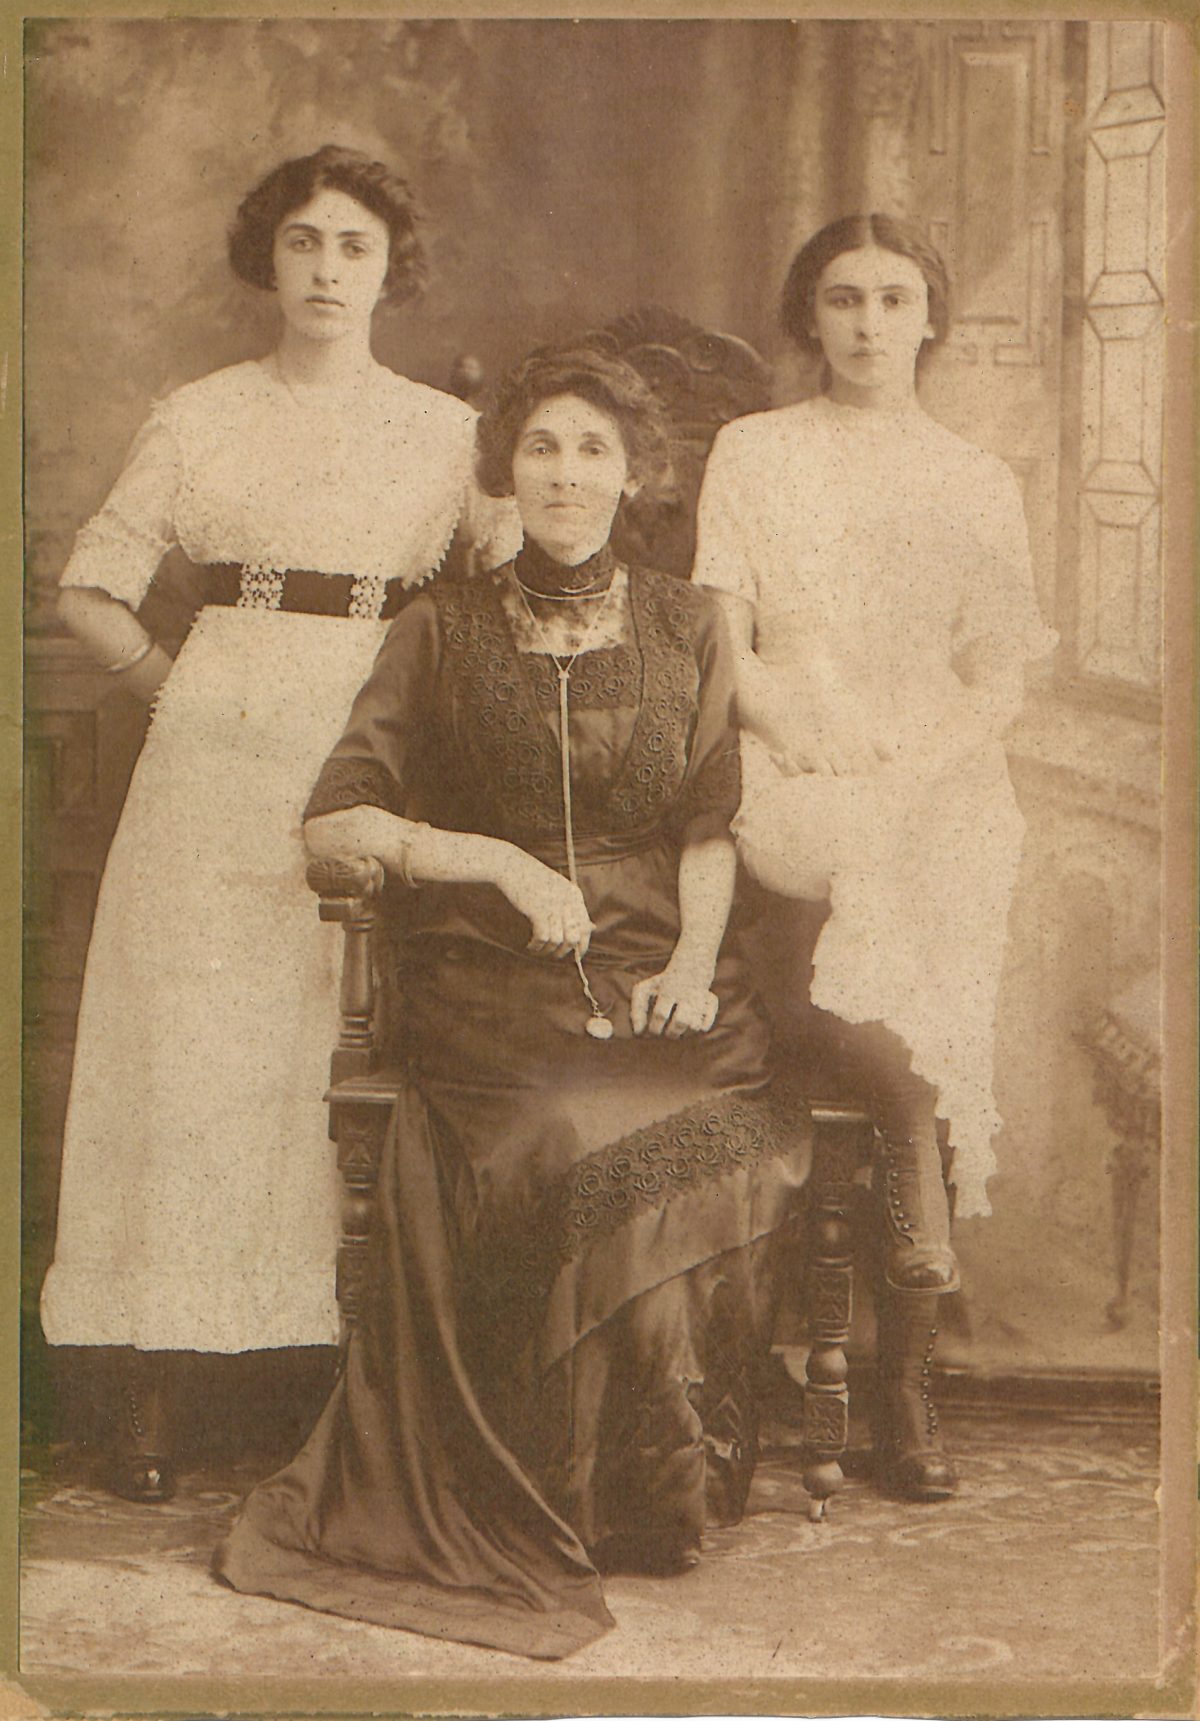 Portrait of a women with her sister and daughter by Joseph Kornweiss at 155 Rivington St, NYC ca. 1907